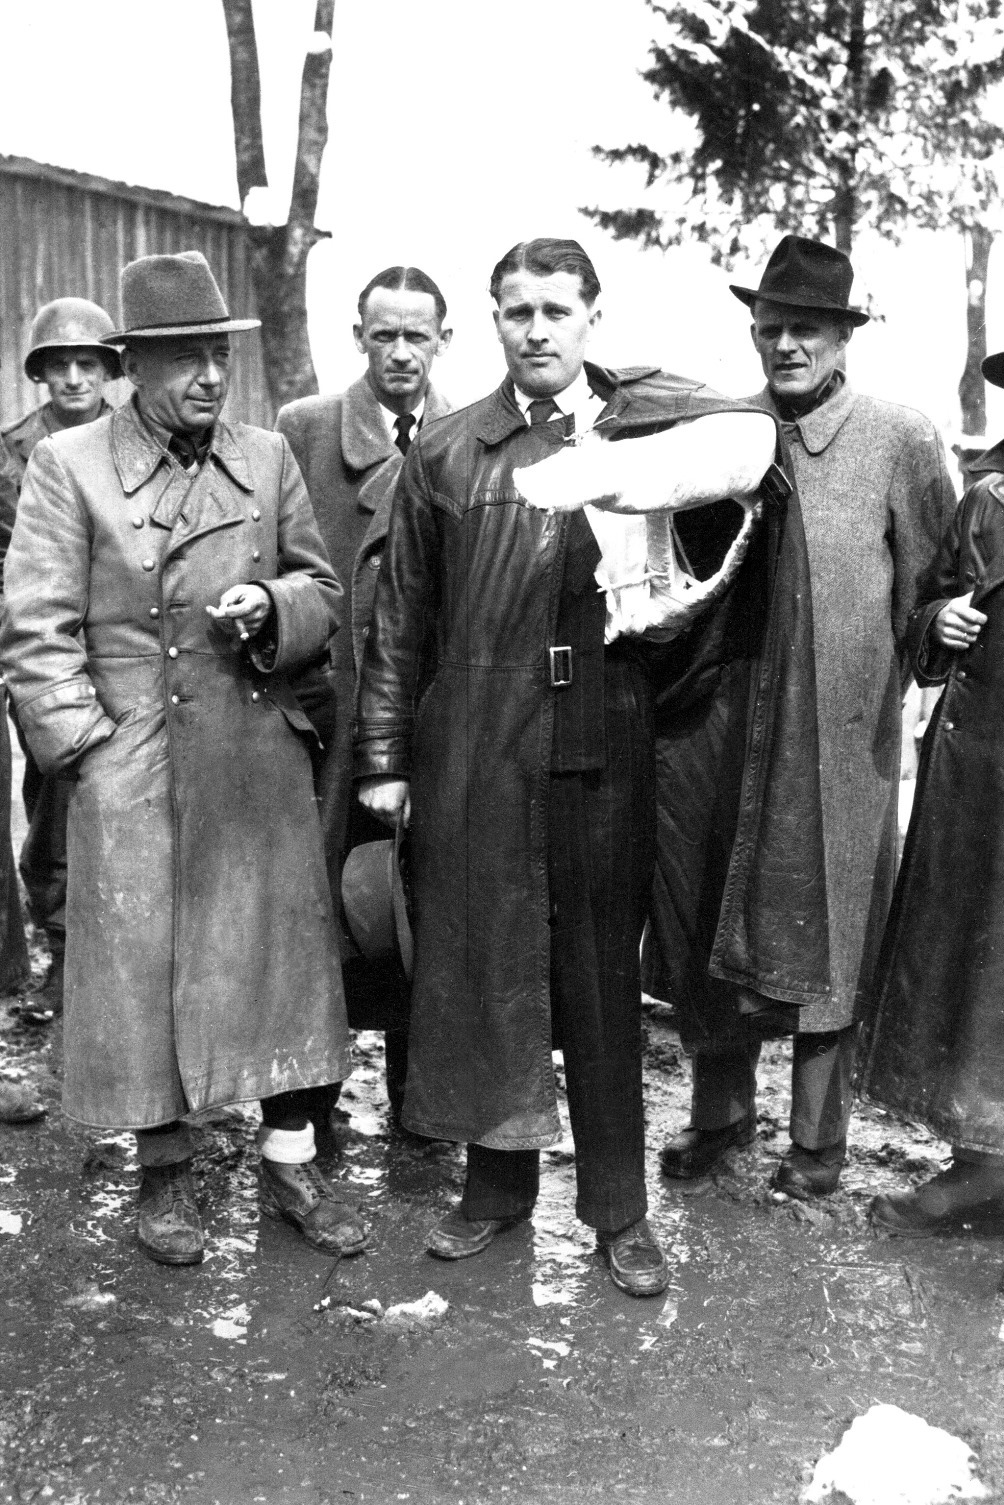 Walter Dornberger, Wernher von Brau and others after they surrendered to U.S. troops. Austria, May 3, 1945